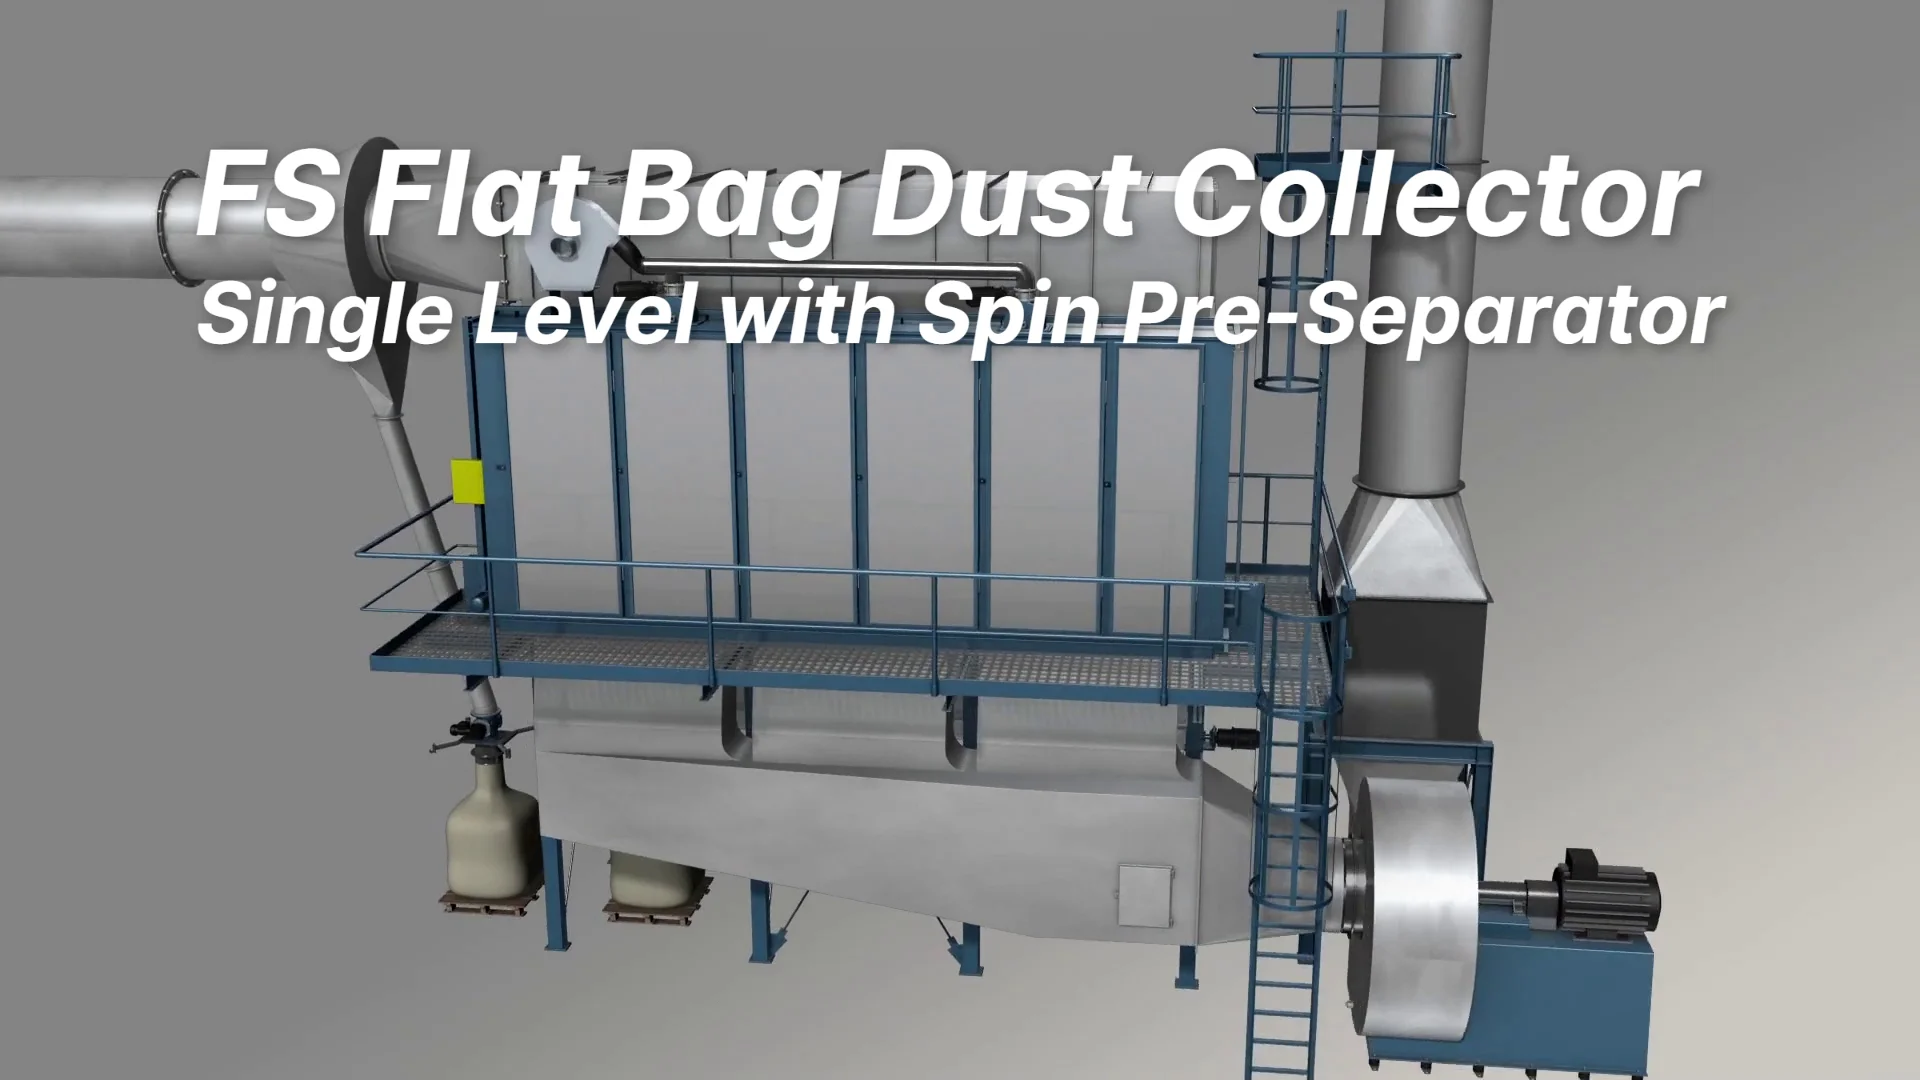 Pneumatic Conveying of Baghouse & ESP Filter Dusts | polimak